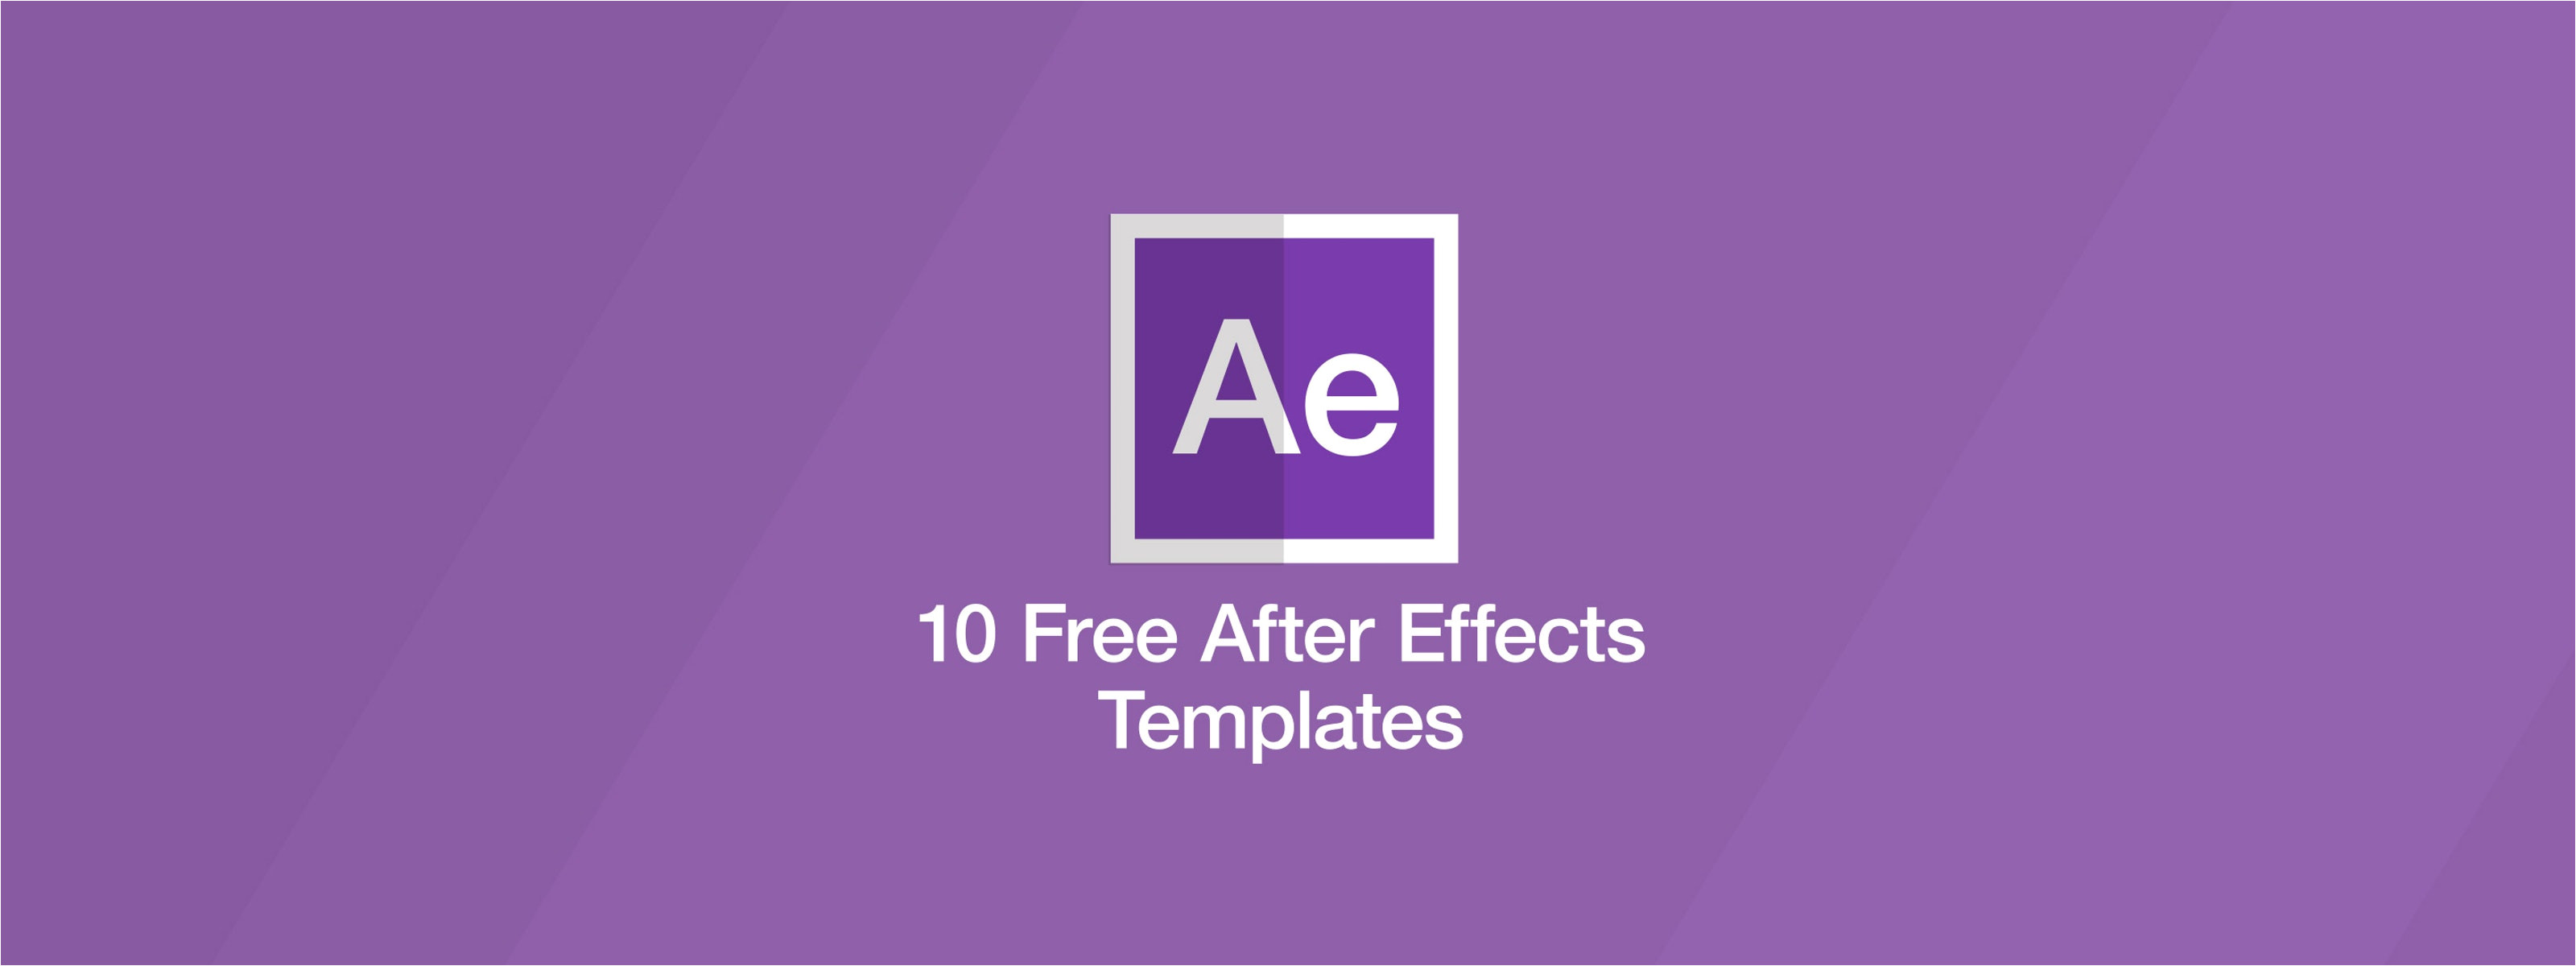 aftereffect-templates-williamson-ga-us